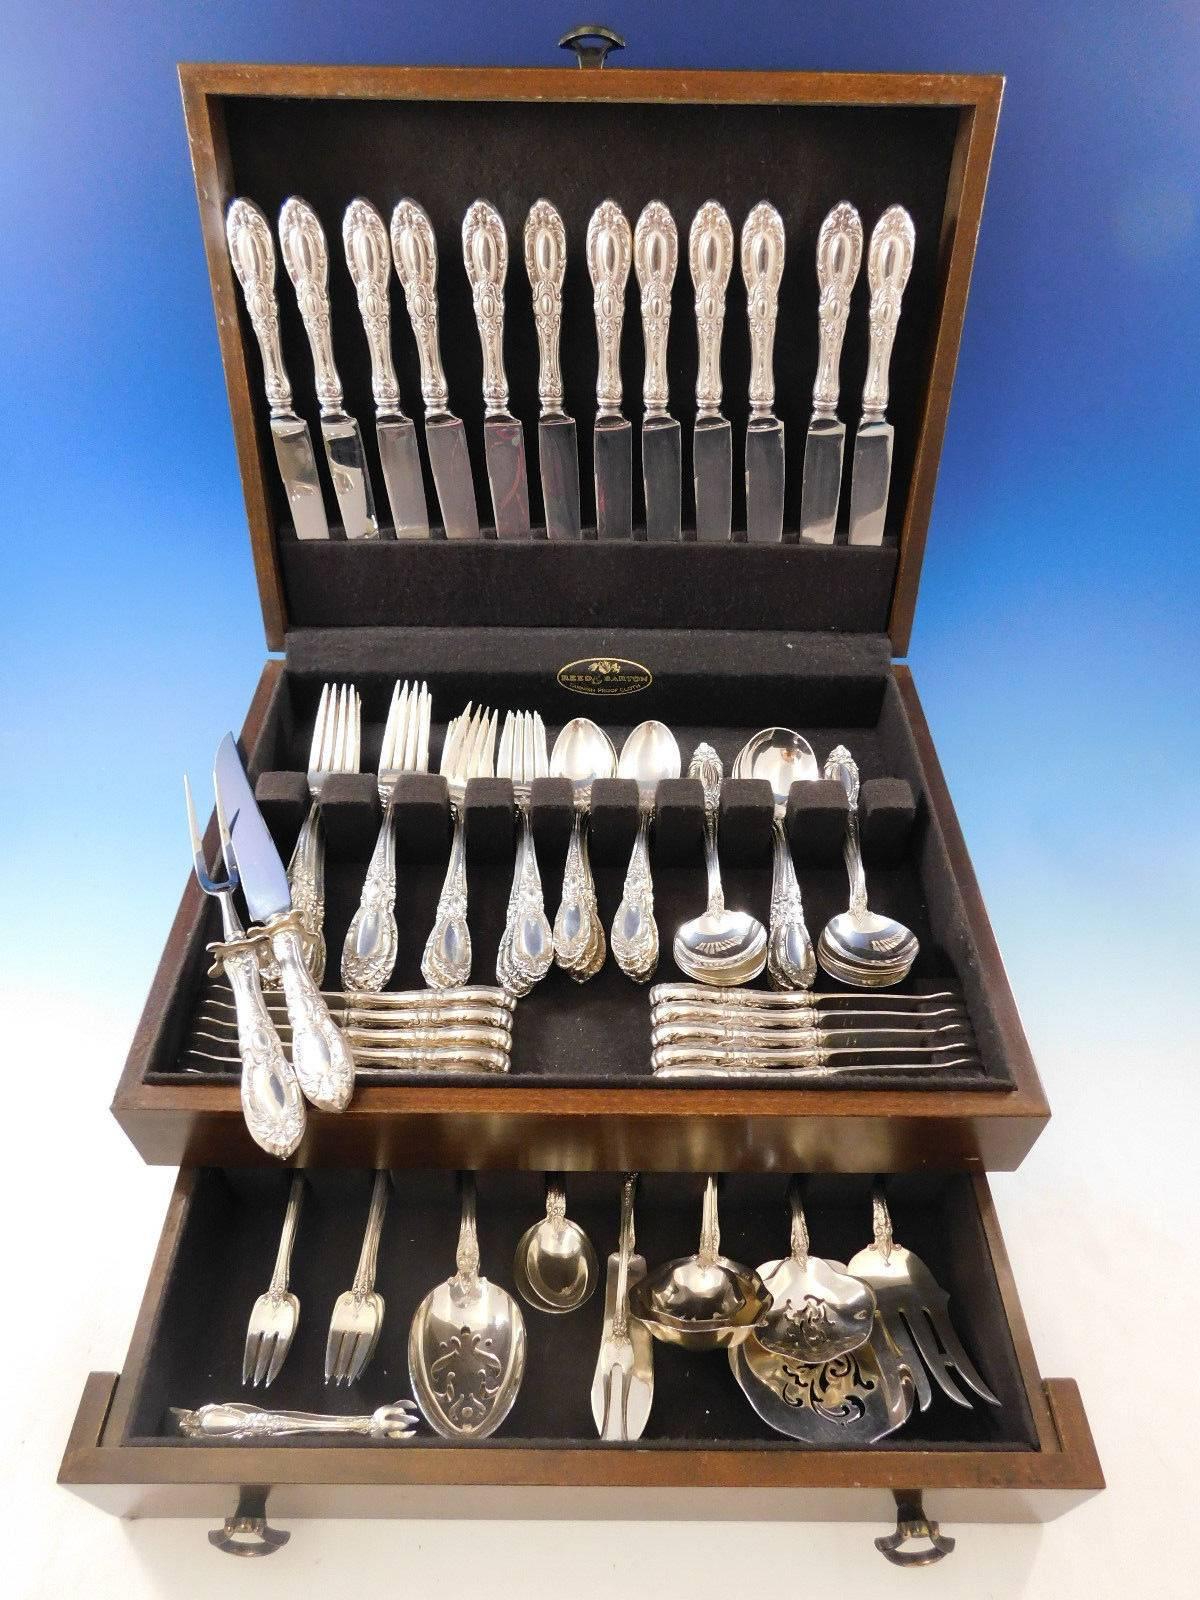 Impressive King Richard by Towle sterling silver flatware set - 98 pieces. This set includes:

12 knives, 8 7/8